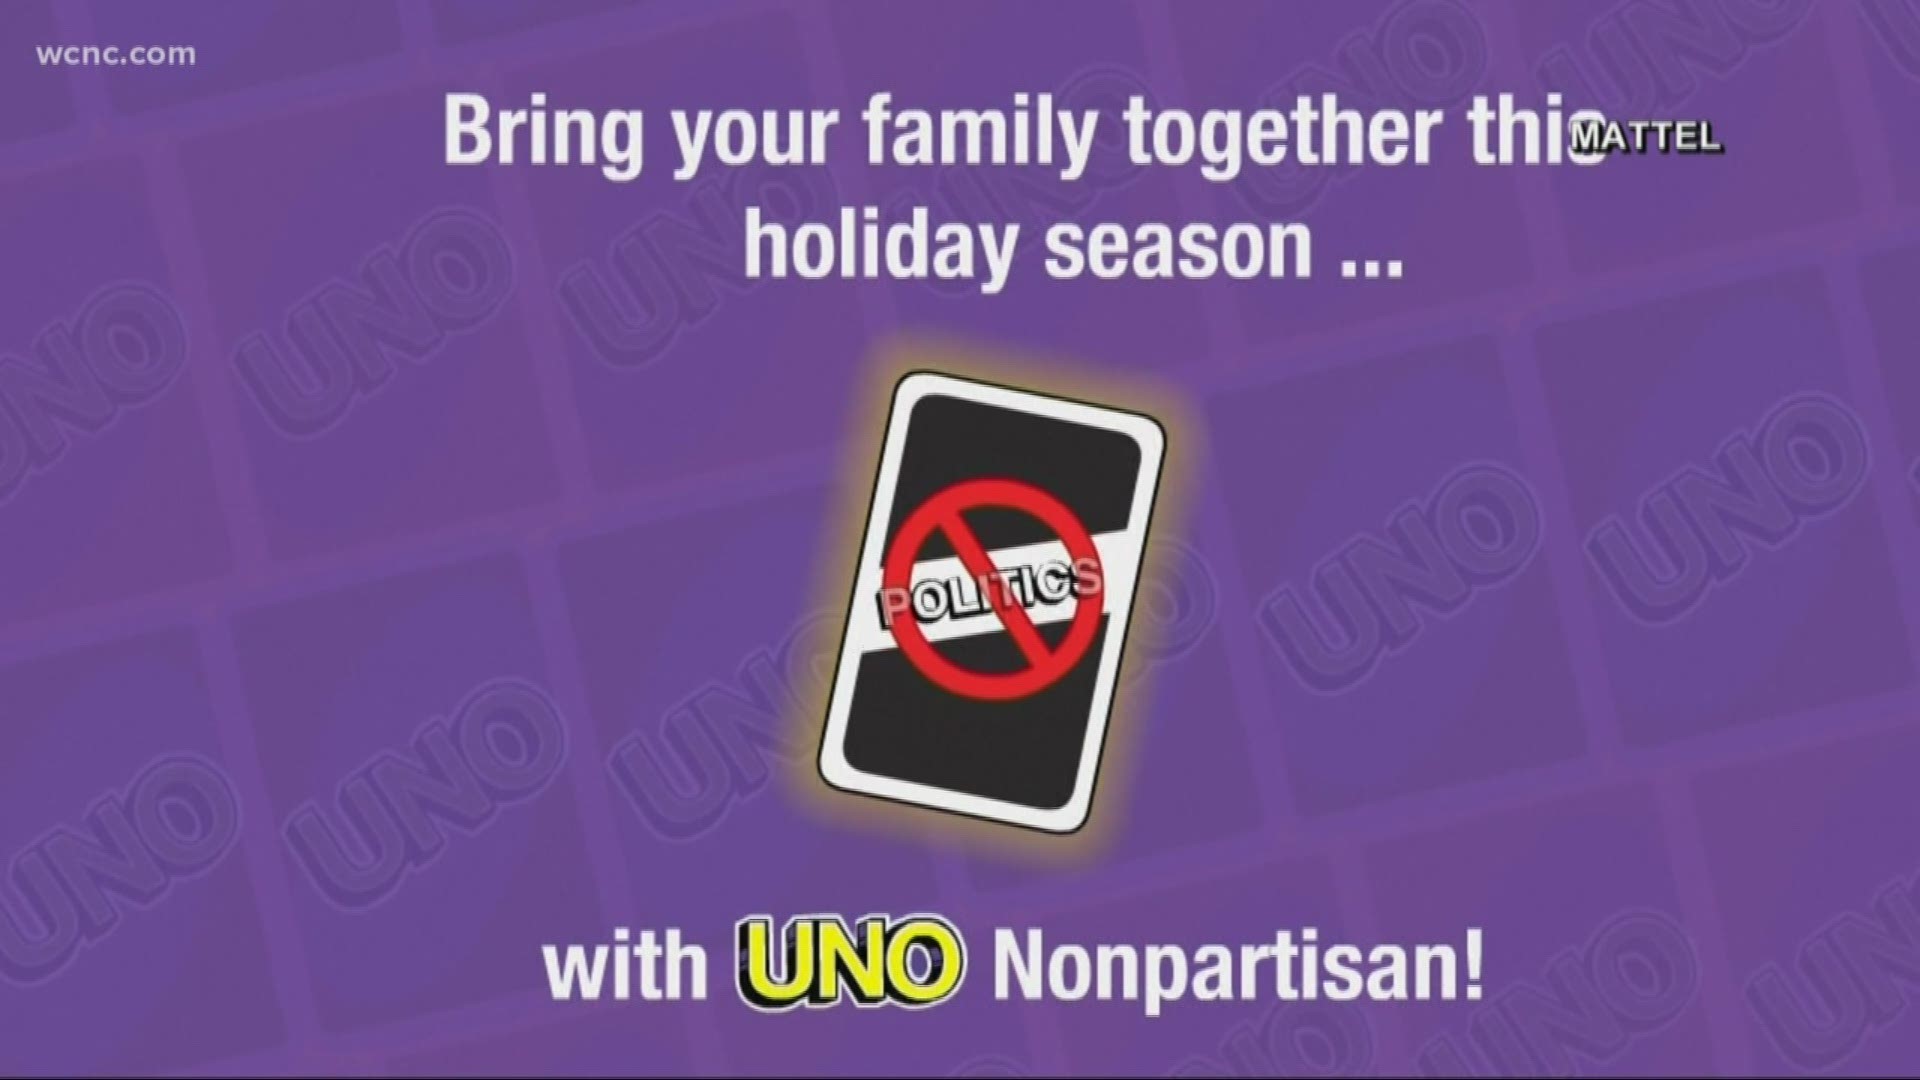 'Uno' is helping you leave politics at the door during Thanksgiving dinner.